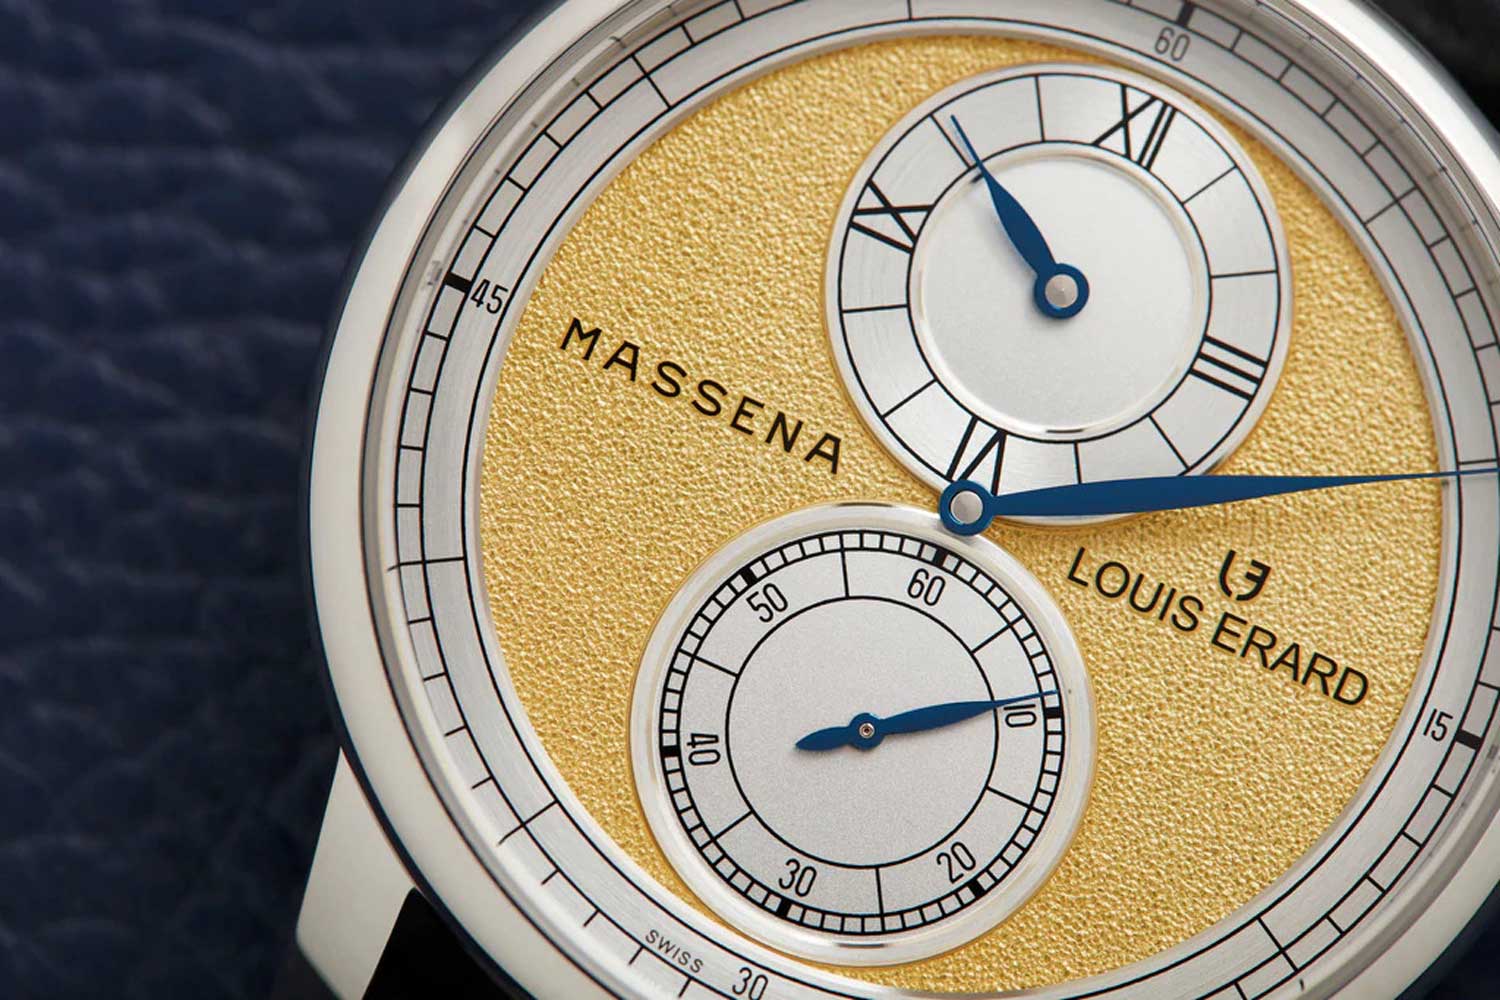 Le Régulateur Louis Erard × Massena LAB featuring a dash of Antide Janvier and a touch of 19th century marine chronometry